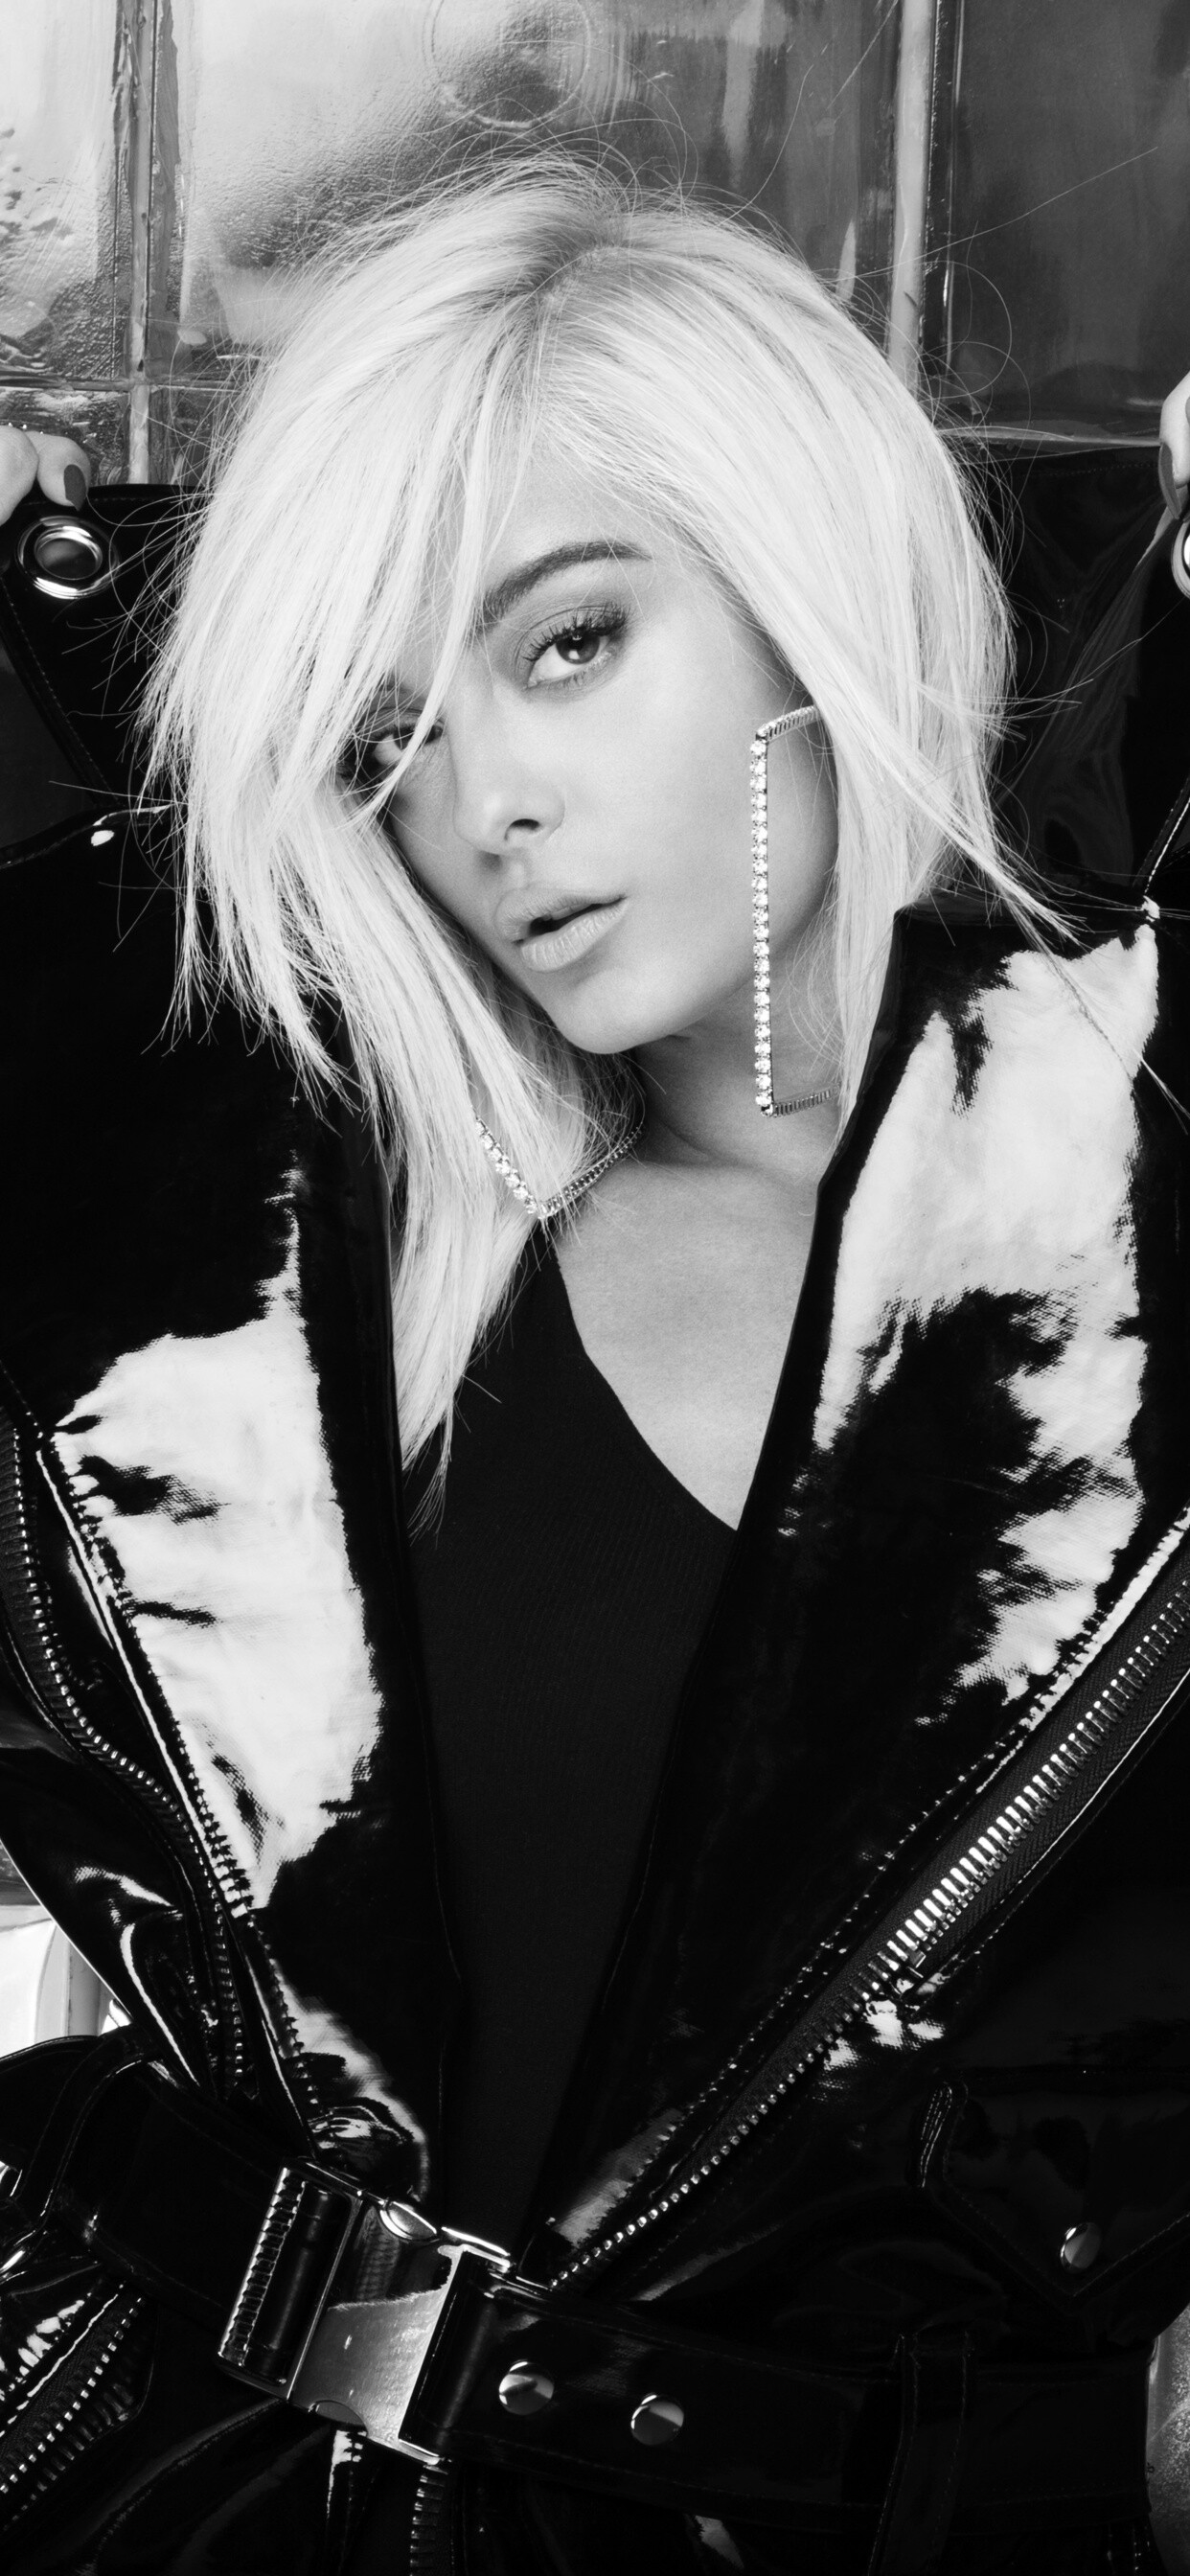 Bebe Rexha: Monochrome, Her most prominent songwriting effort of 2013 was Eminem's and Rihanna's "The Monster". 1250x2690 HD Wallpaper.